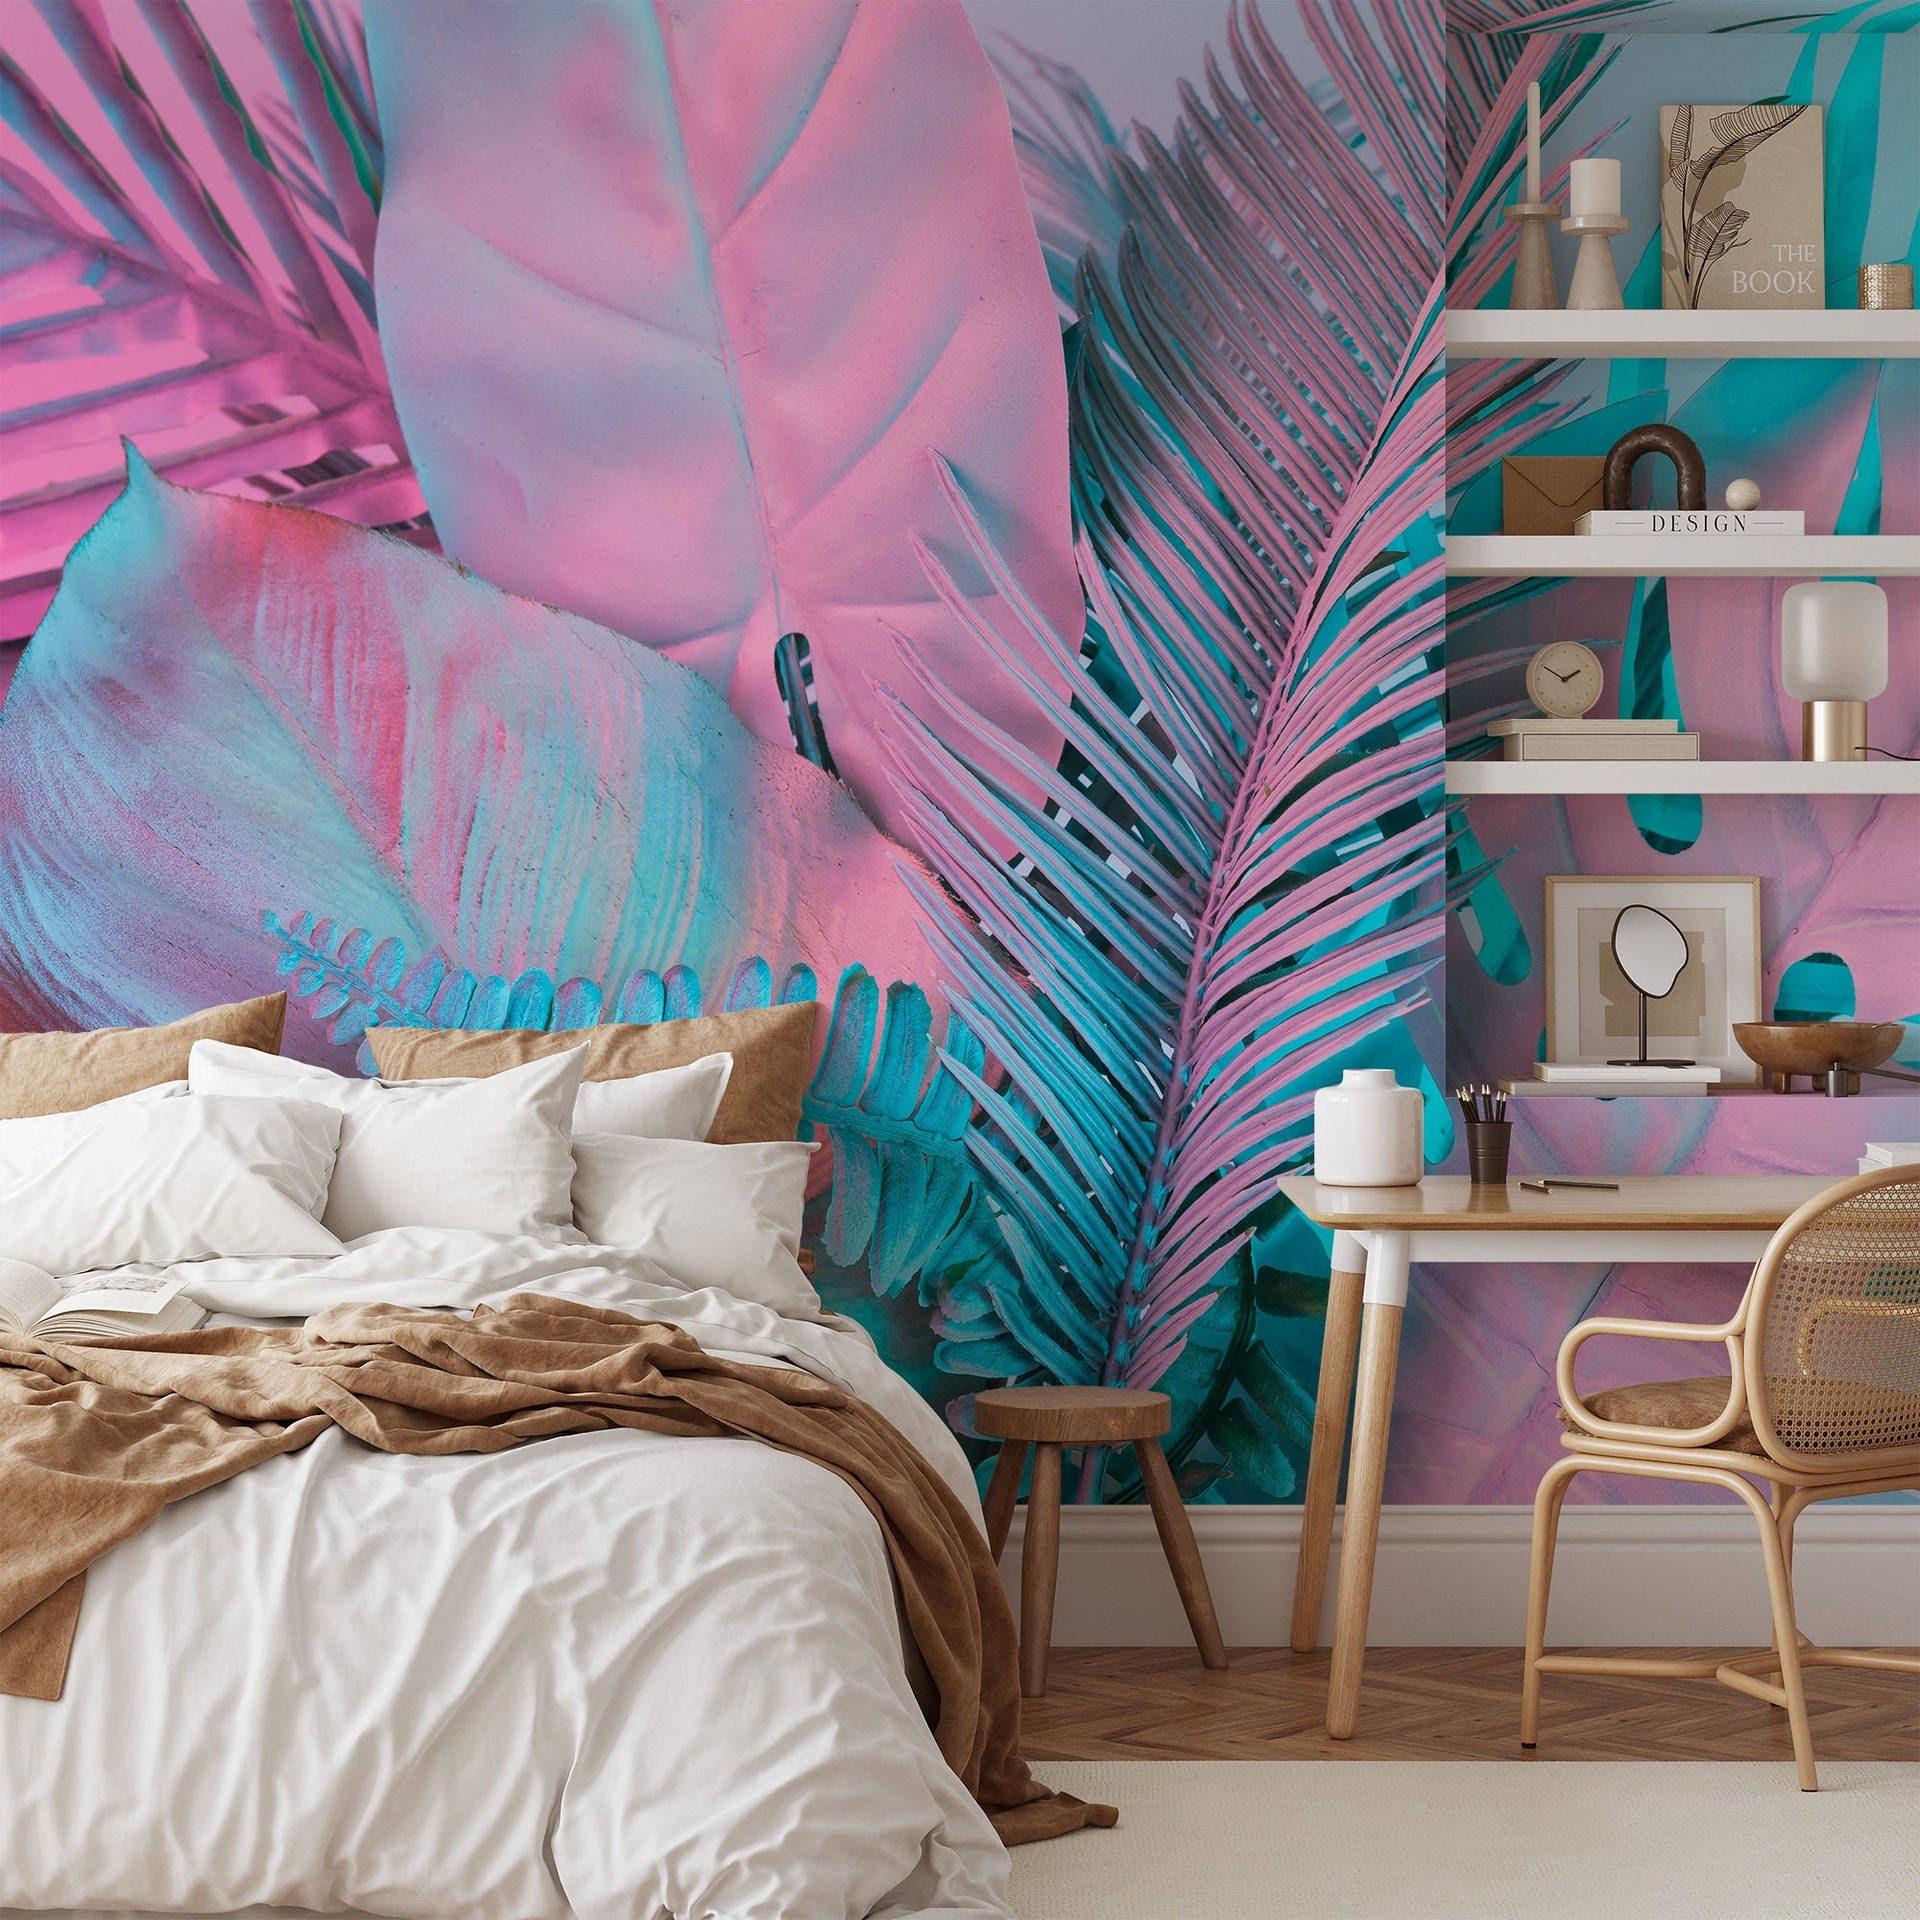 A Bedroom With A Pink And Blue Wall Wallpaper